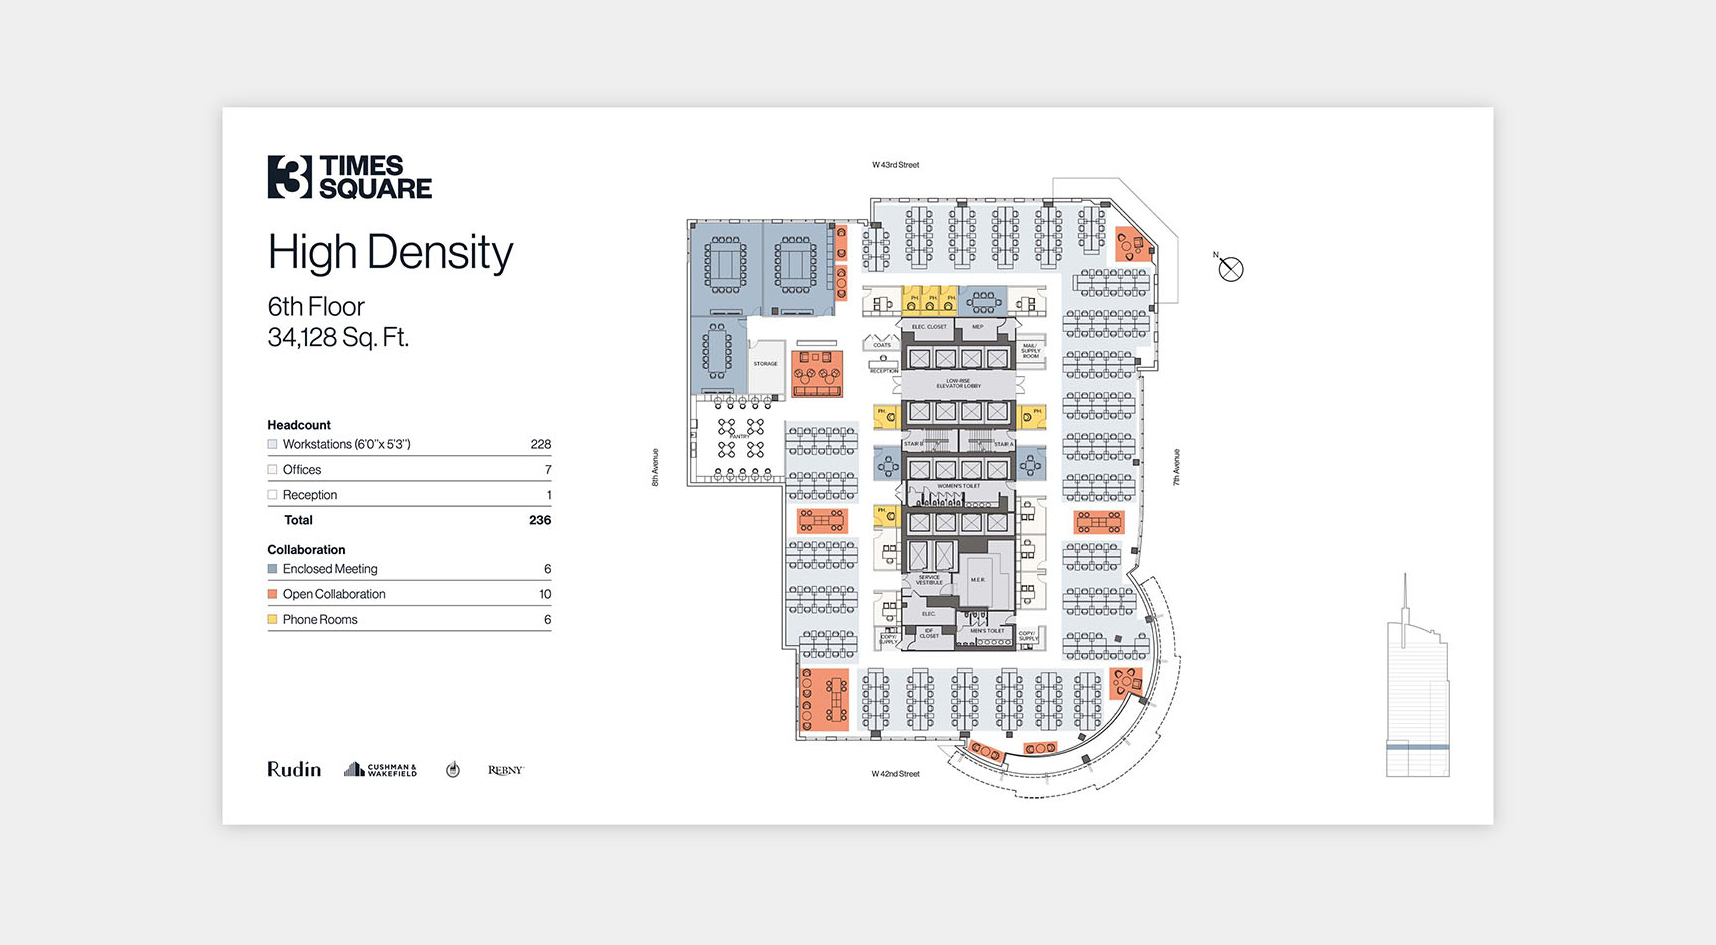 3 times square floor plan by meta form